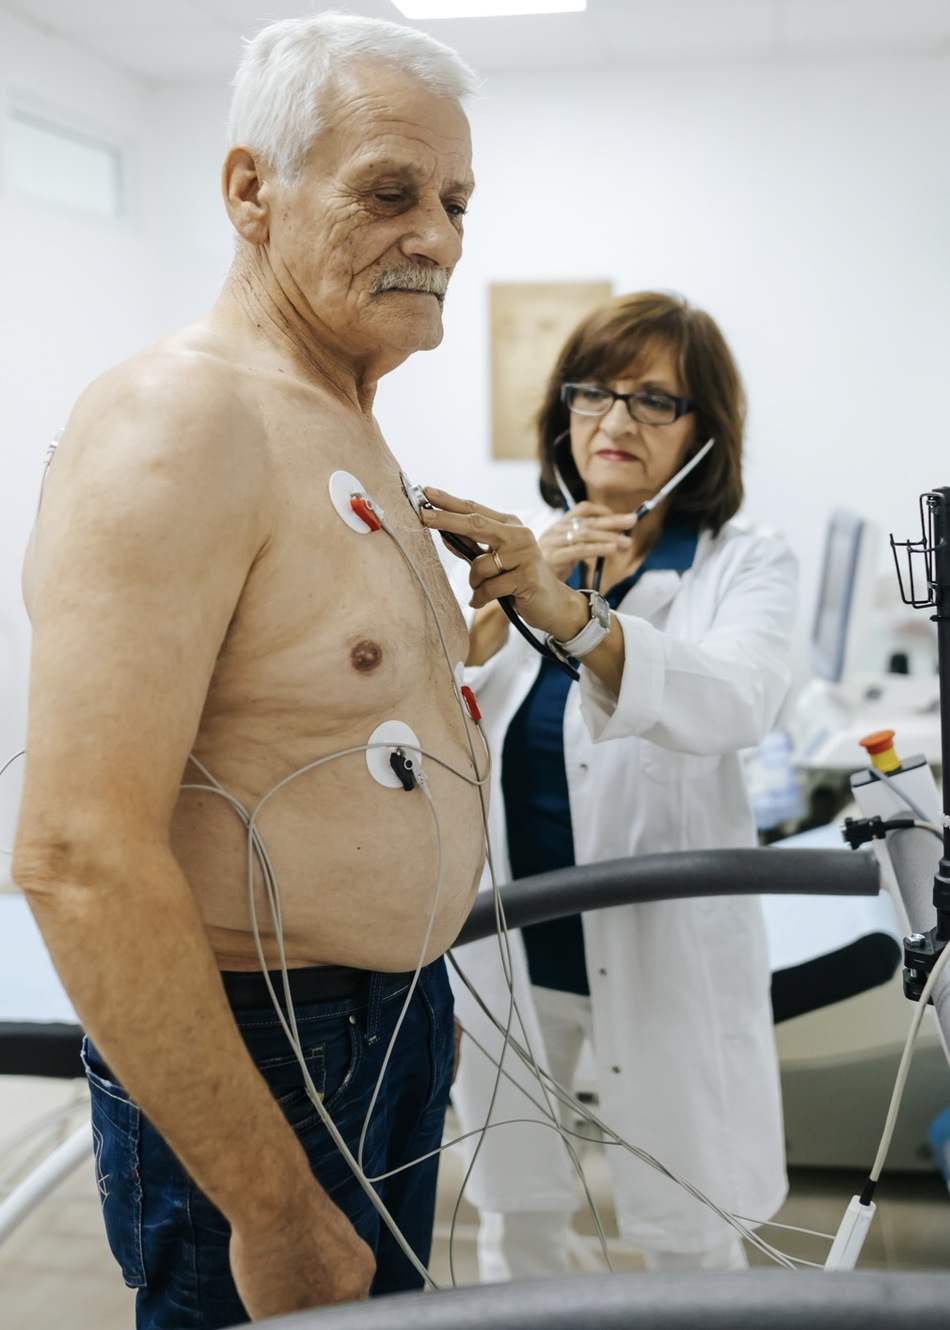 How Cardiac Ablation Can Treat Severe Cases of Atrial Fibrillation